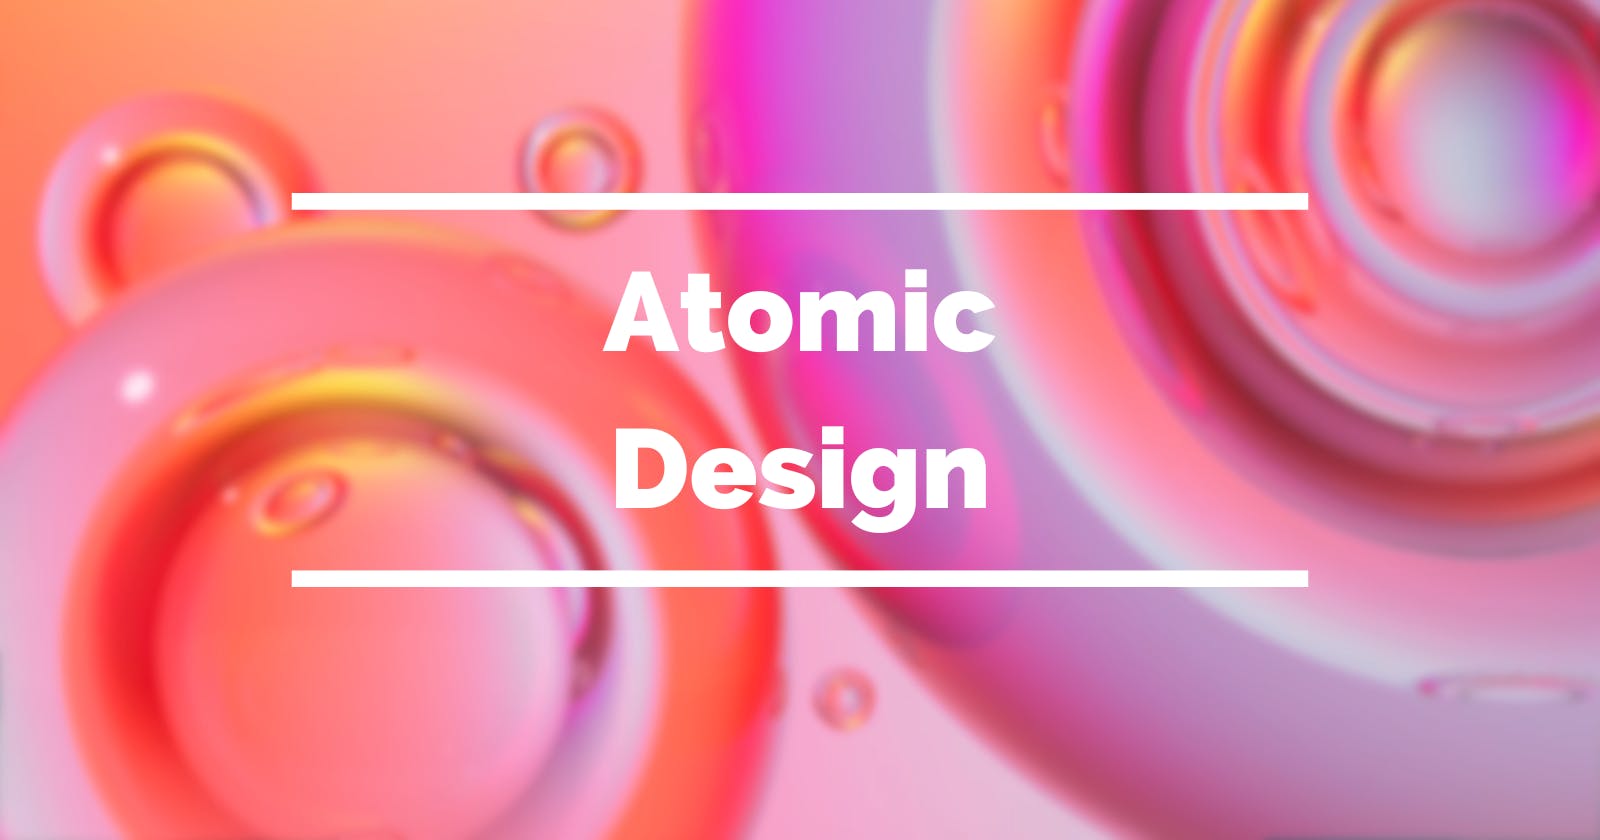 Discover Atomic Design for modular and scalable interfaces